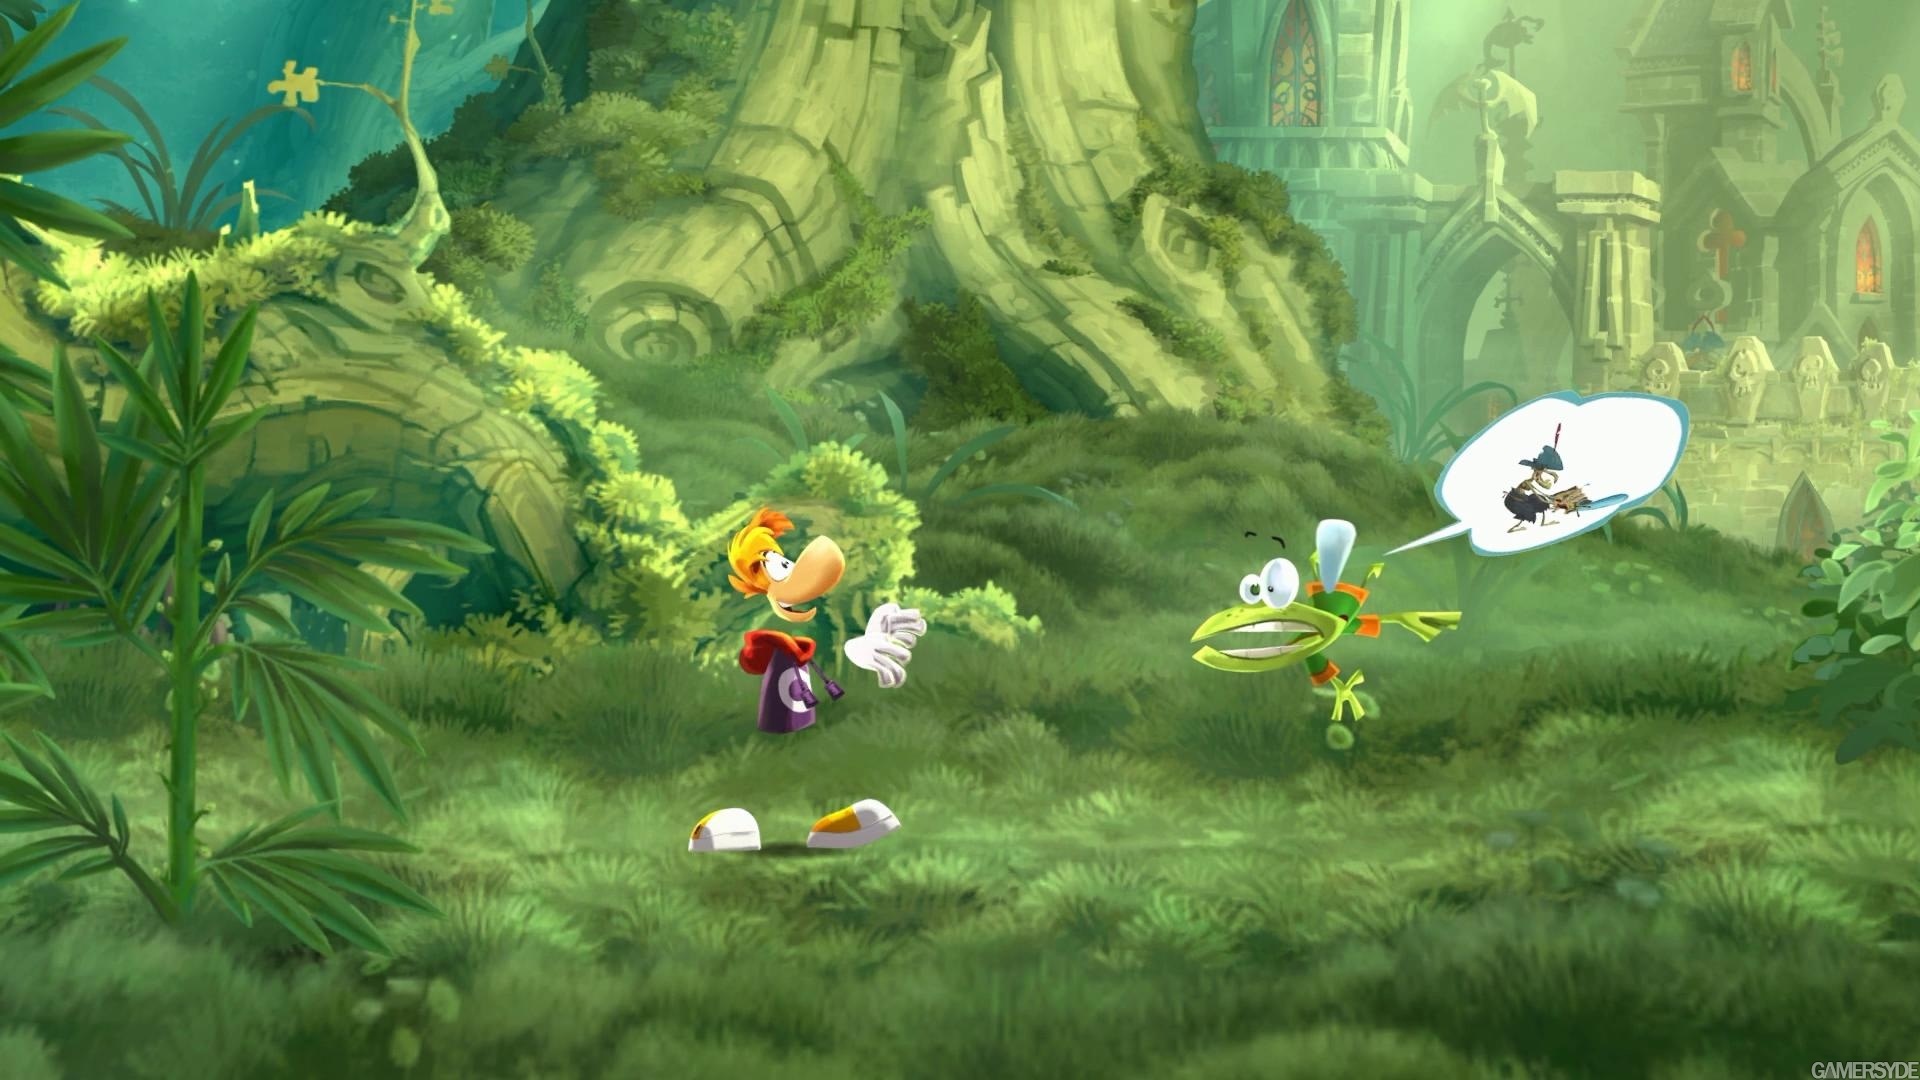 Rayman Legends - Gameplay #1 - High quality stream and download - Gamersyde